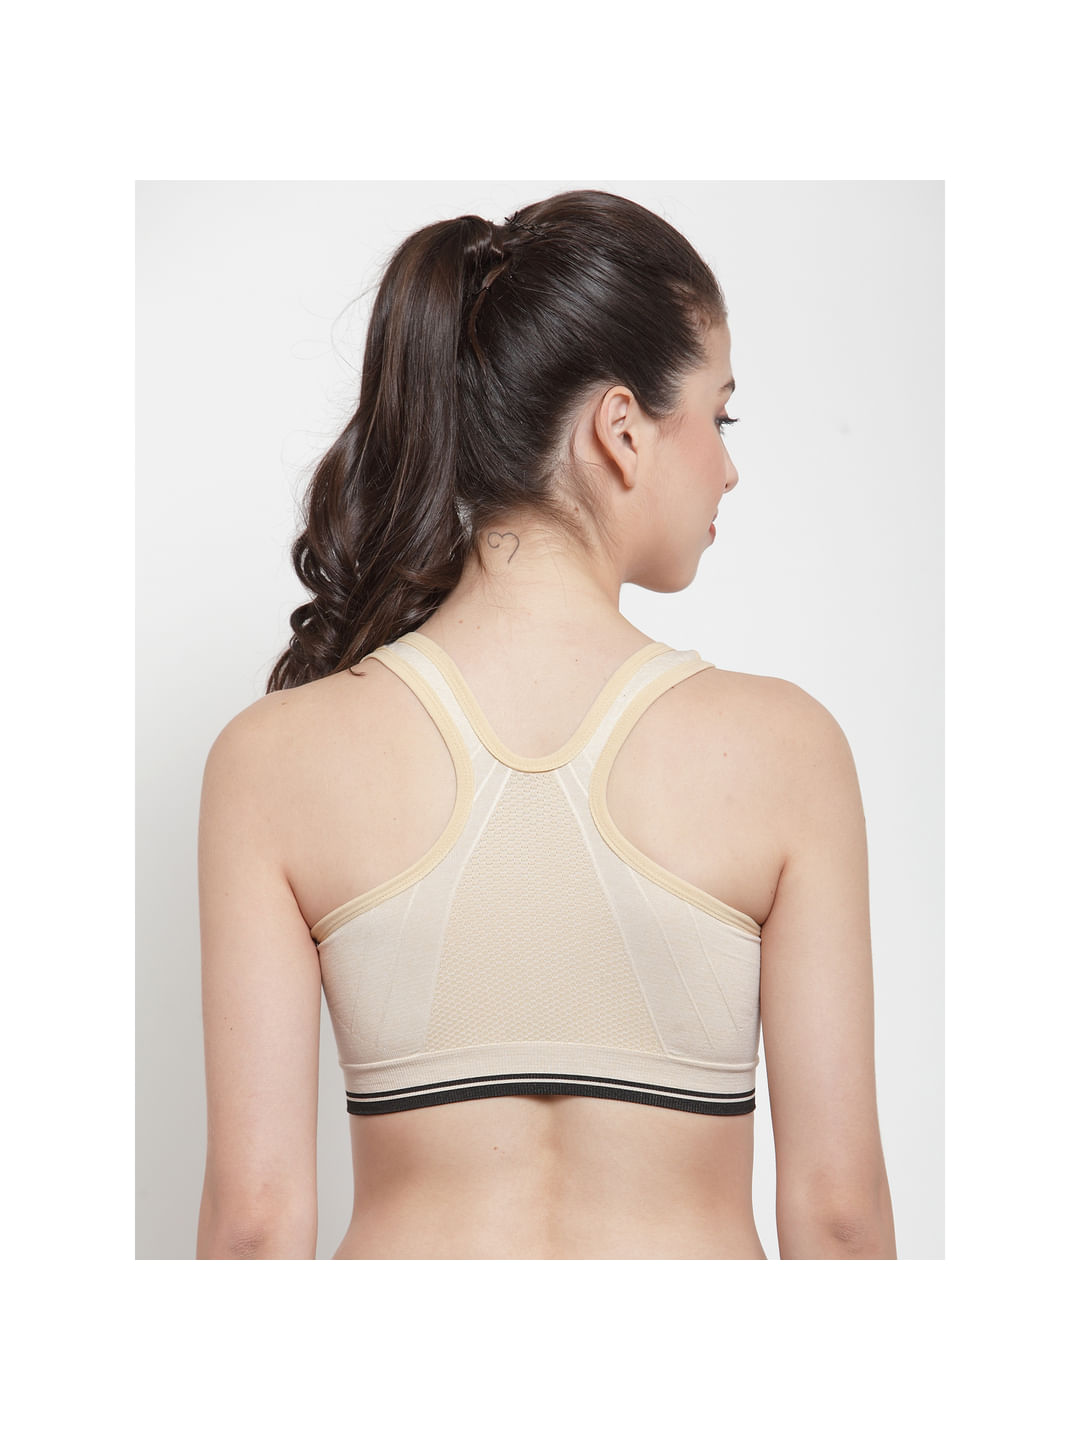 Shyaway Nylon Spandex Pale Ivory T Shirt Bra - Get Best Price from  Manufacturers & Suppliers in India